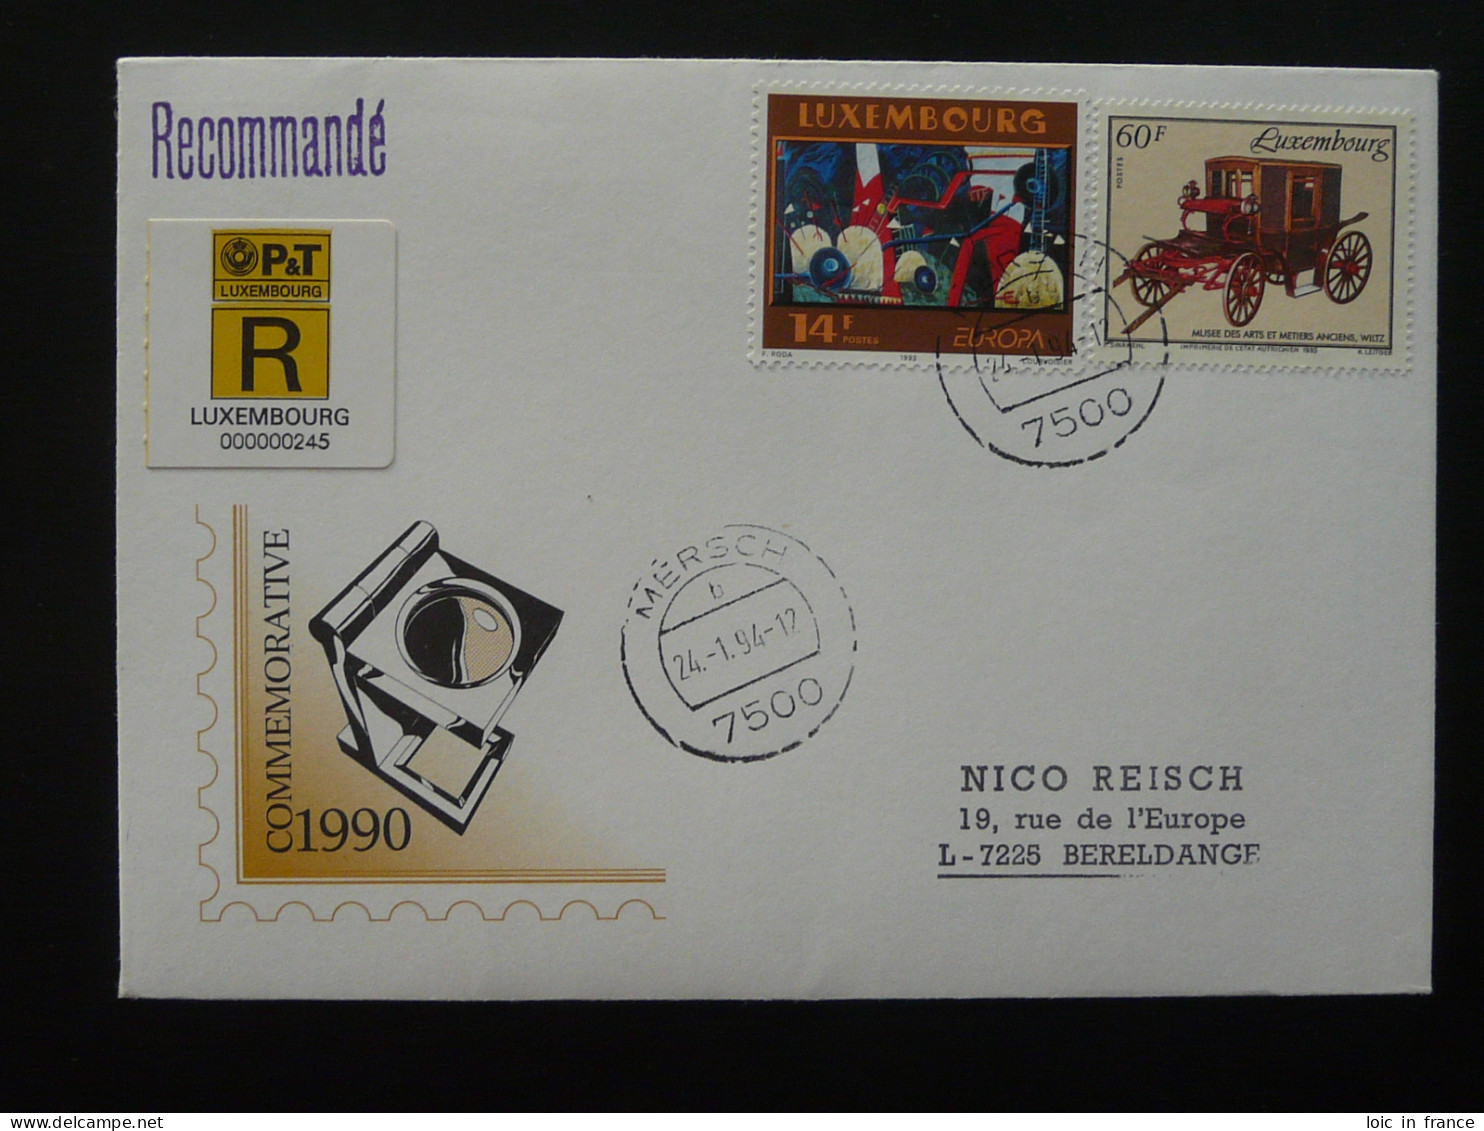 Lettre Recommandée Registered Cover Mersch Luxembourg 1994 - Covers & Documents